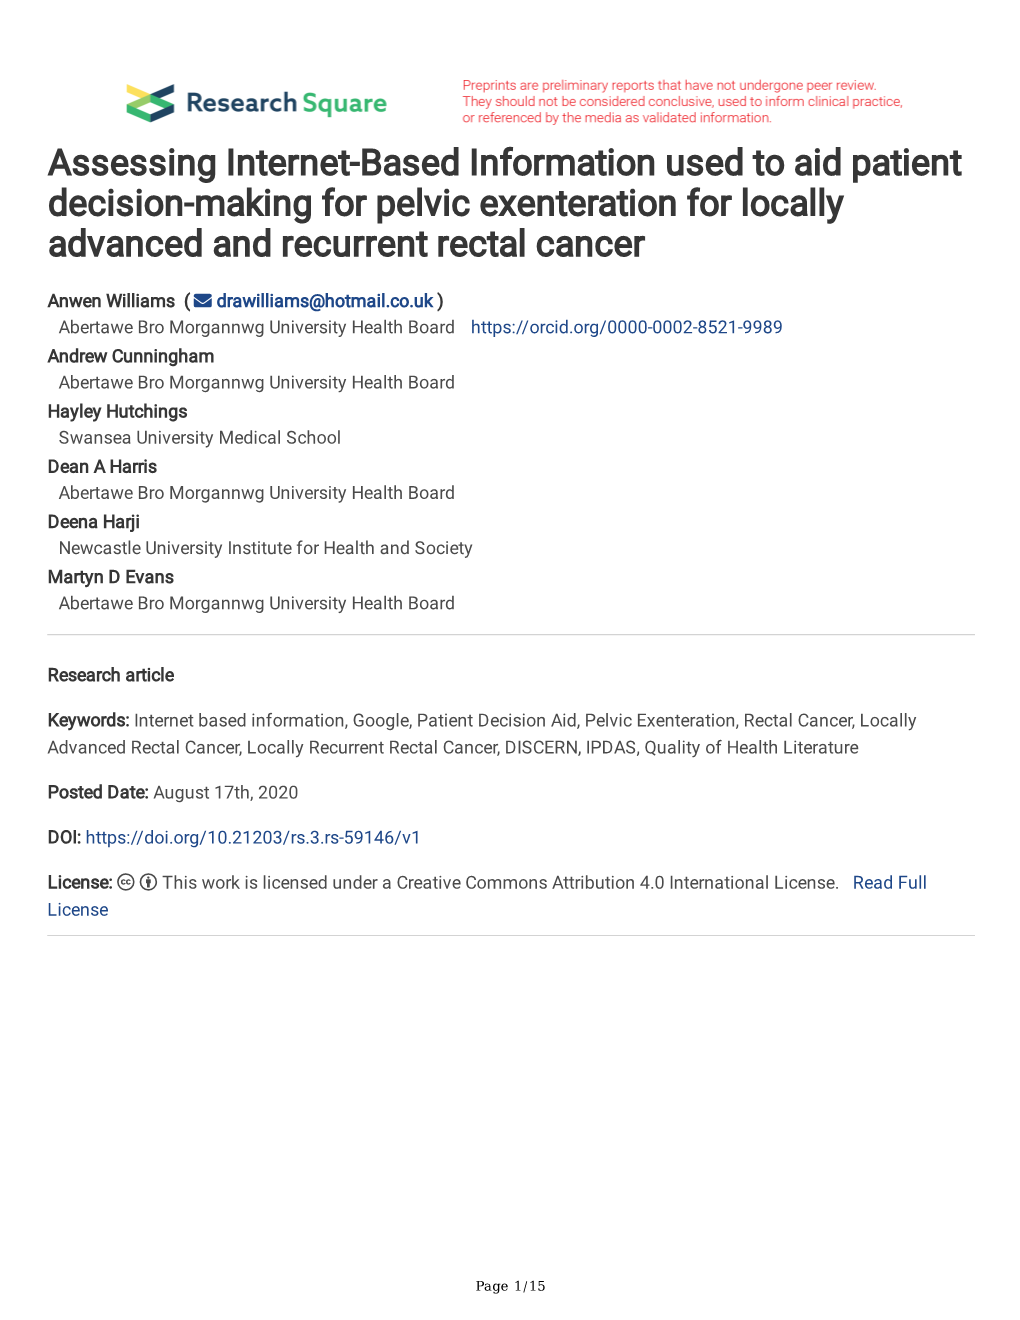 Assessing Internet-Based Information Used to Aid Patient Decision-Making for Pelvic Exenteration for Locally Advanced and Recurrent Rectal Cancer